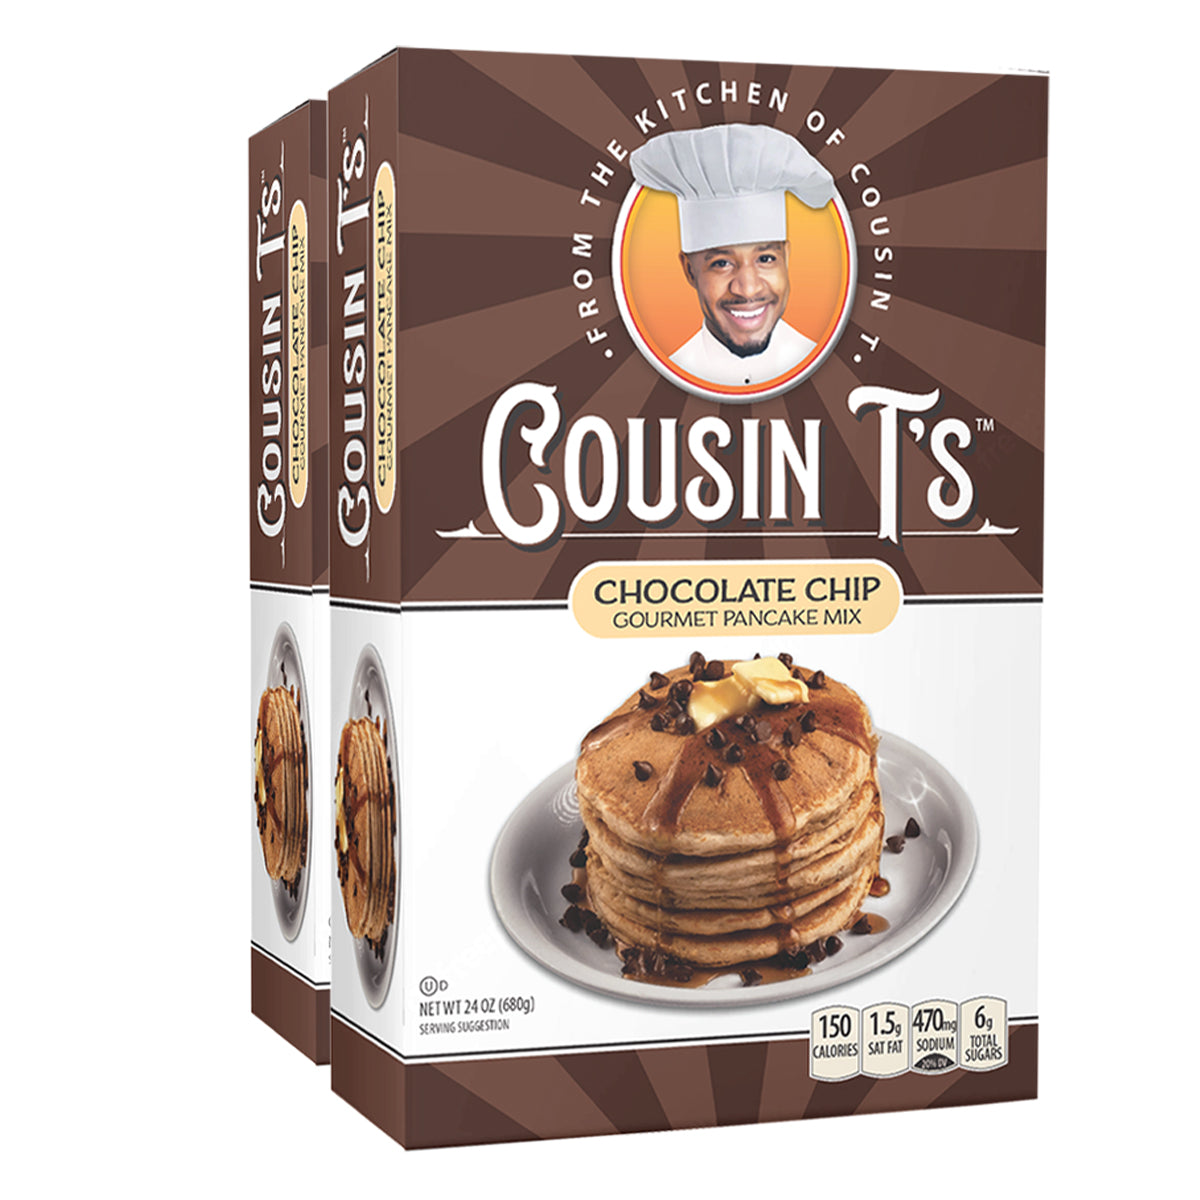 Cousin T's Chocolate Chip Gourmet Pancake Mix (2 Pack)